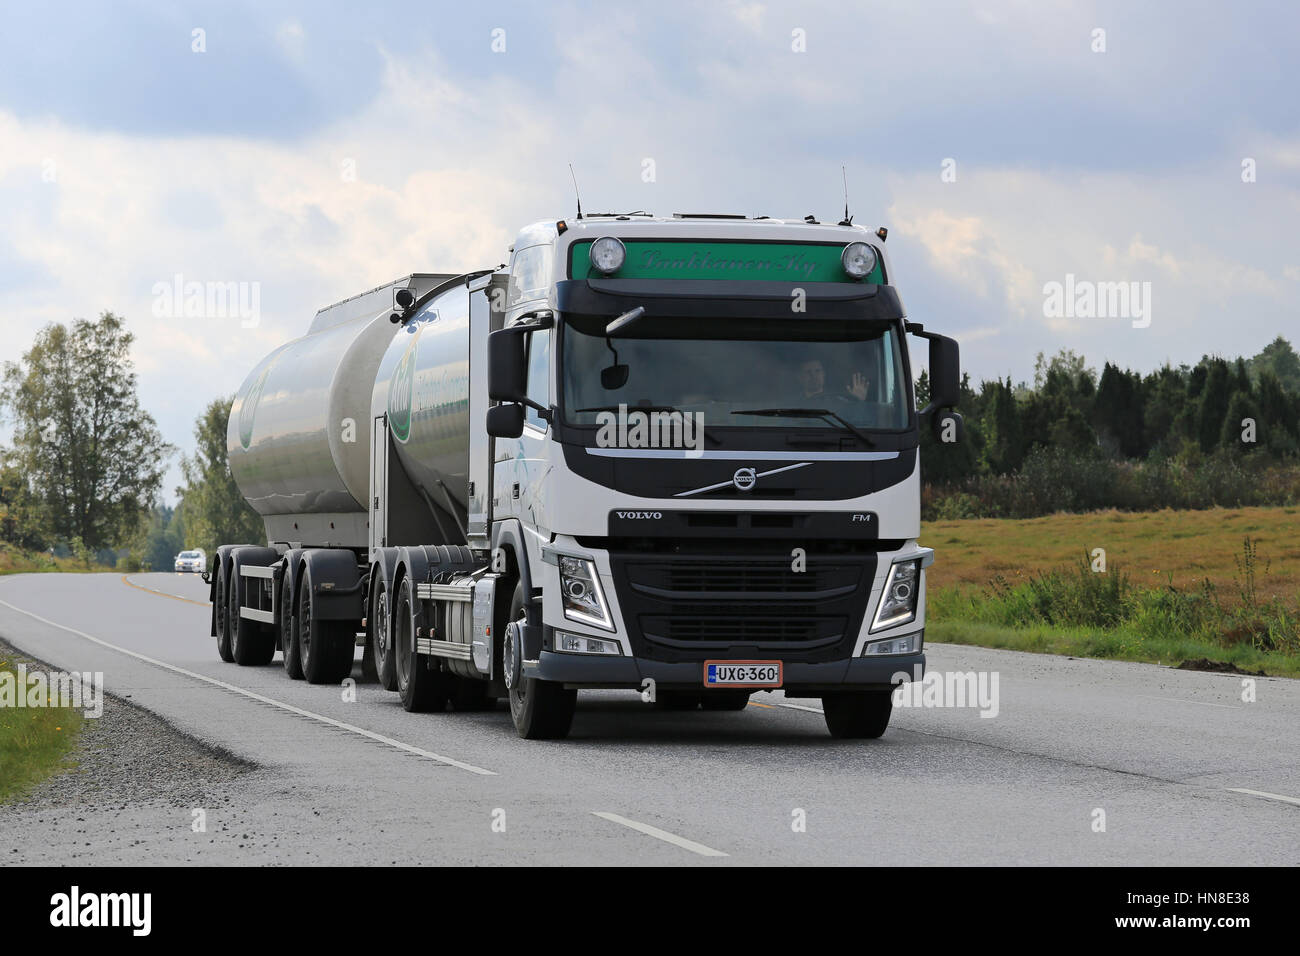 PADASJOKI, FINLAND - SEPTEMBER 1, 2016: Volvo FM milk truck moves along rural highway to collect milk from farms in the area. Stock Photo